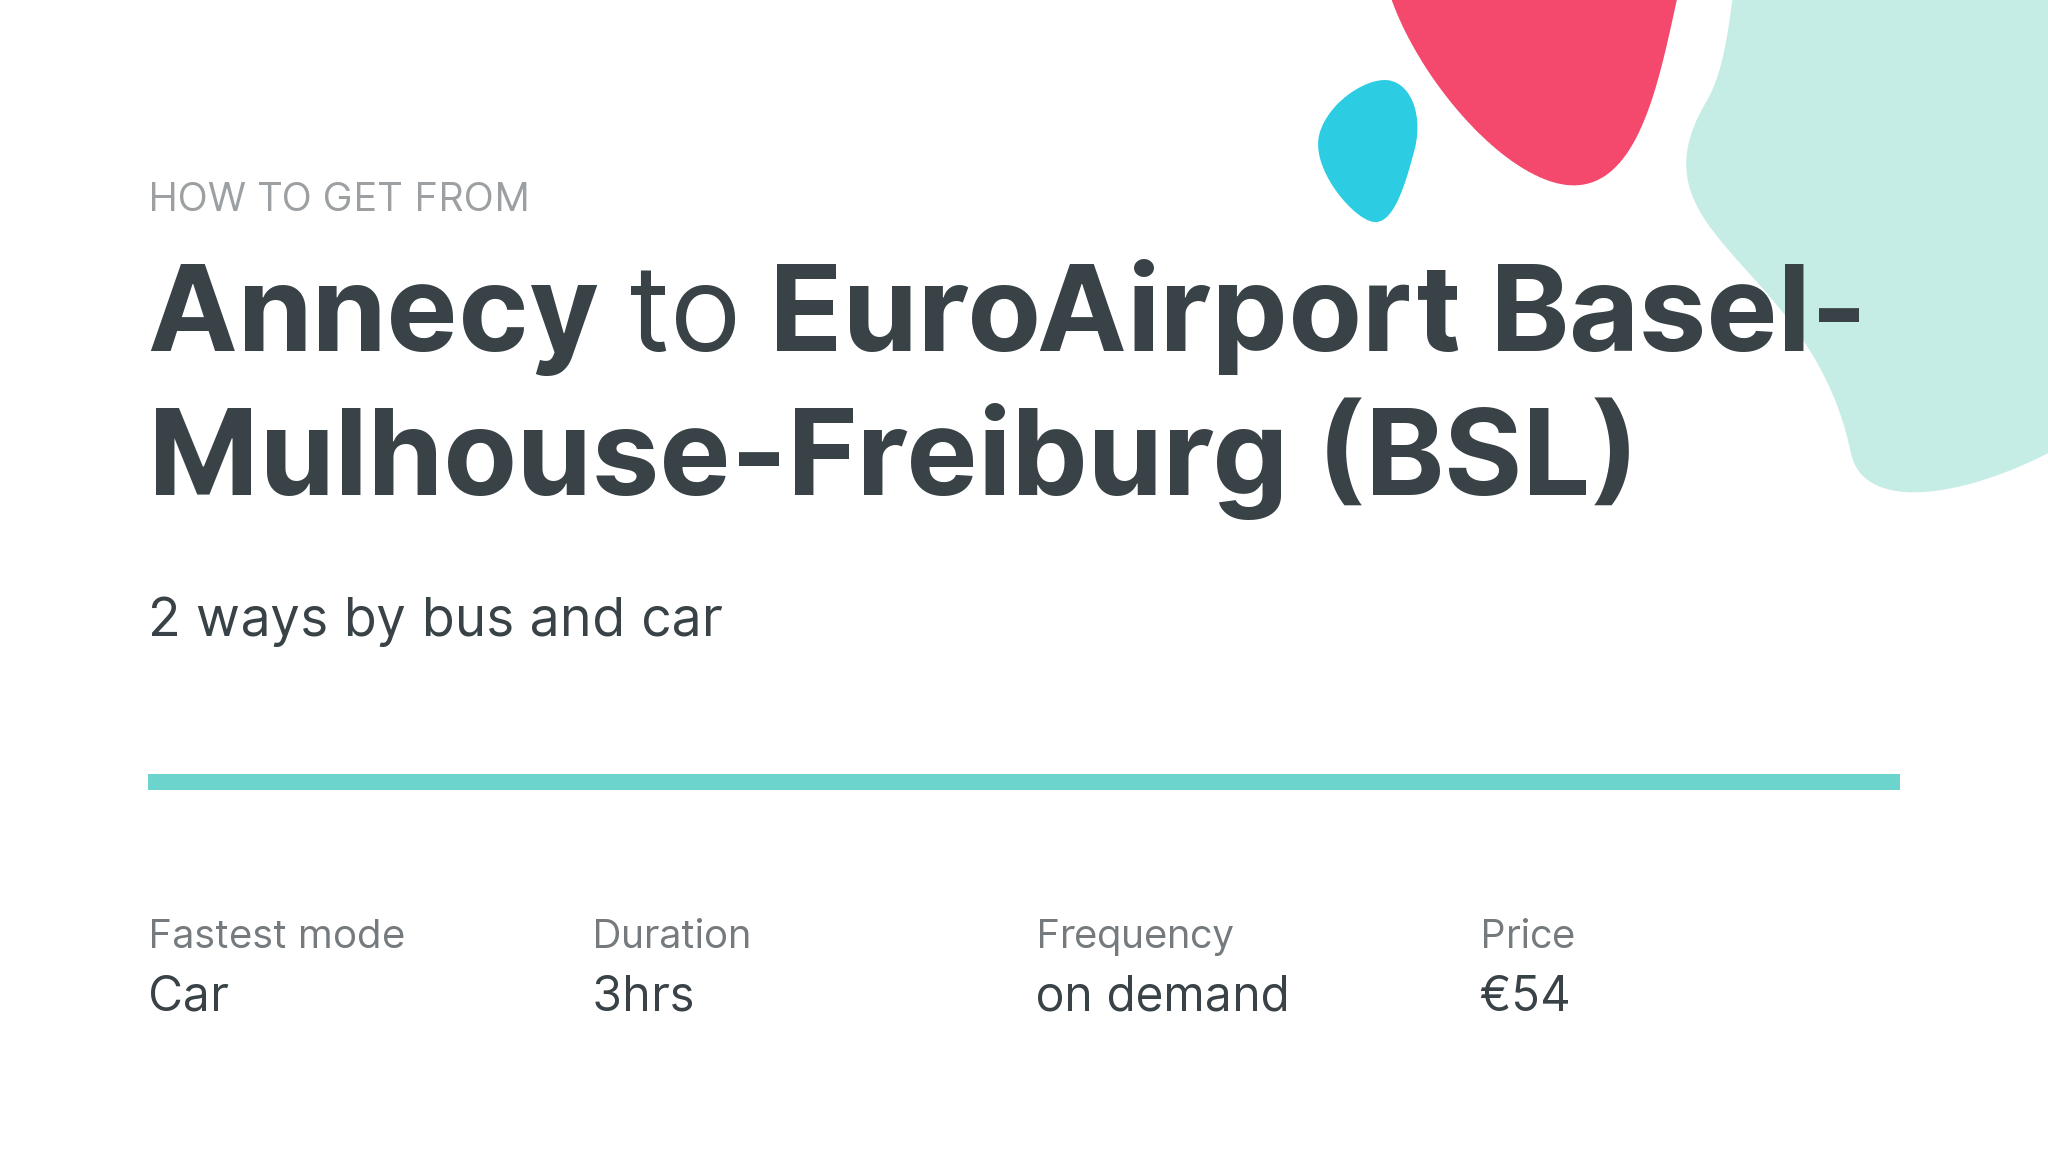 How do I get from Annecy to EuroAirport Basel-Mulhouse-Freiburg (BSL)